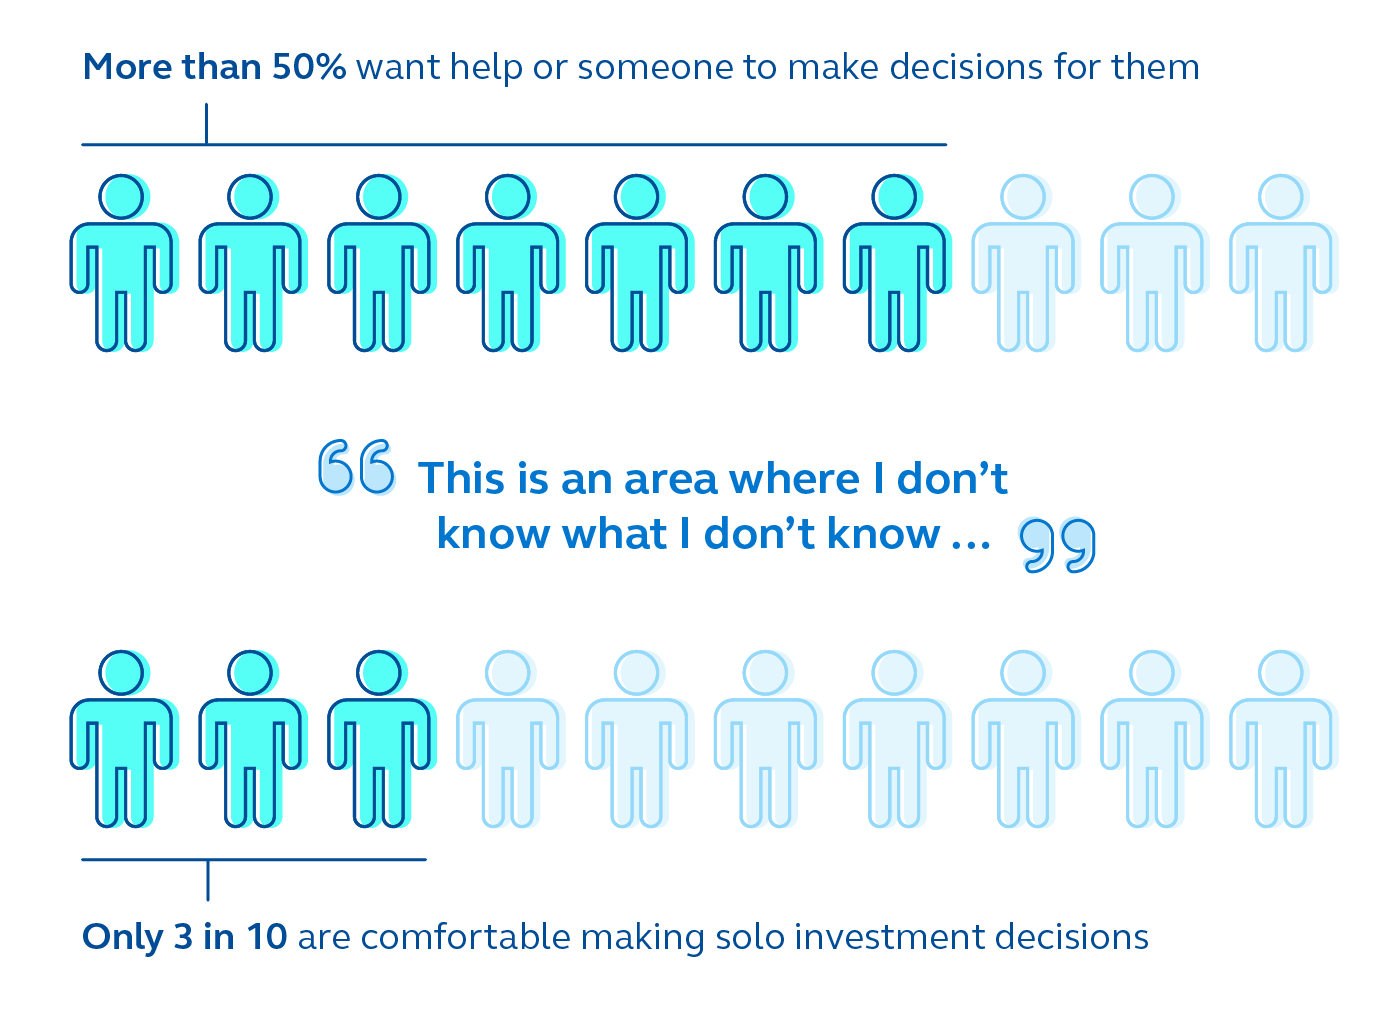 More than 50% of investors want help or someone to make decisions for them. Only 3 in 10 are comfortable making solo investment decisions.